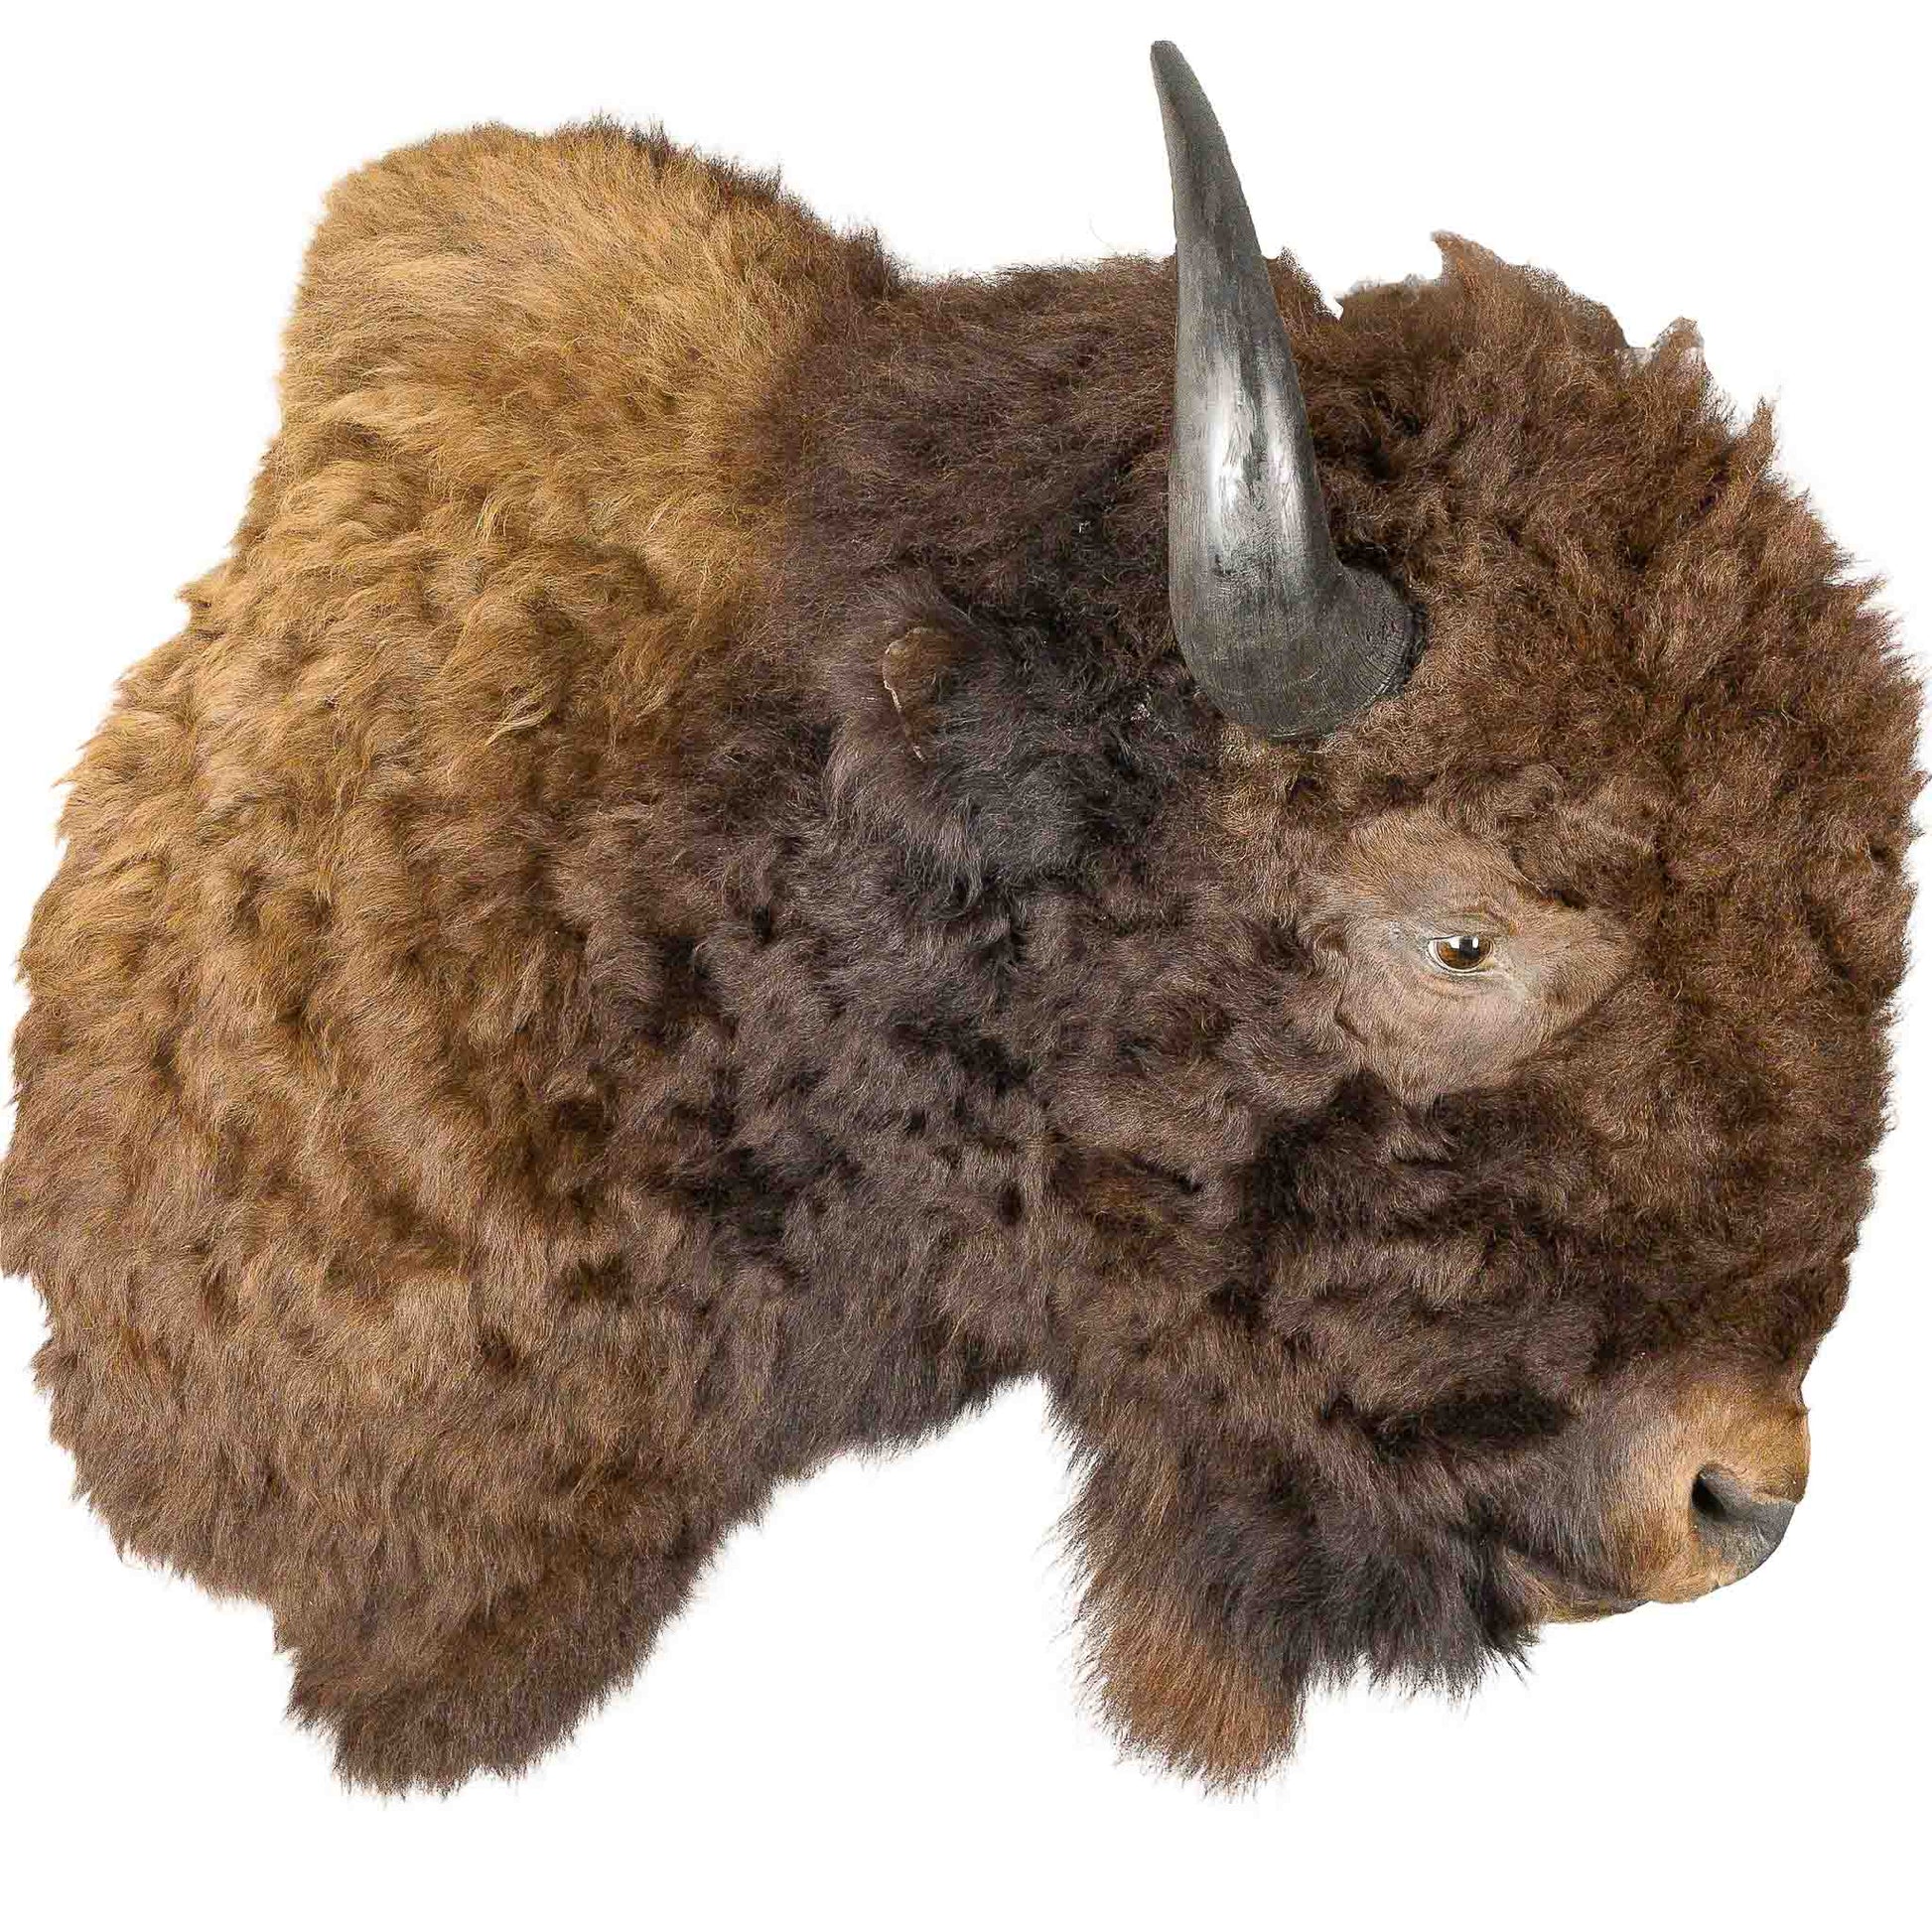 A Home Decor Taxidermy Bison Shoulder Mount of Grade World Class